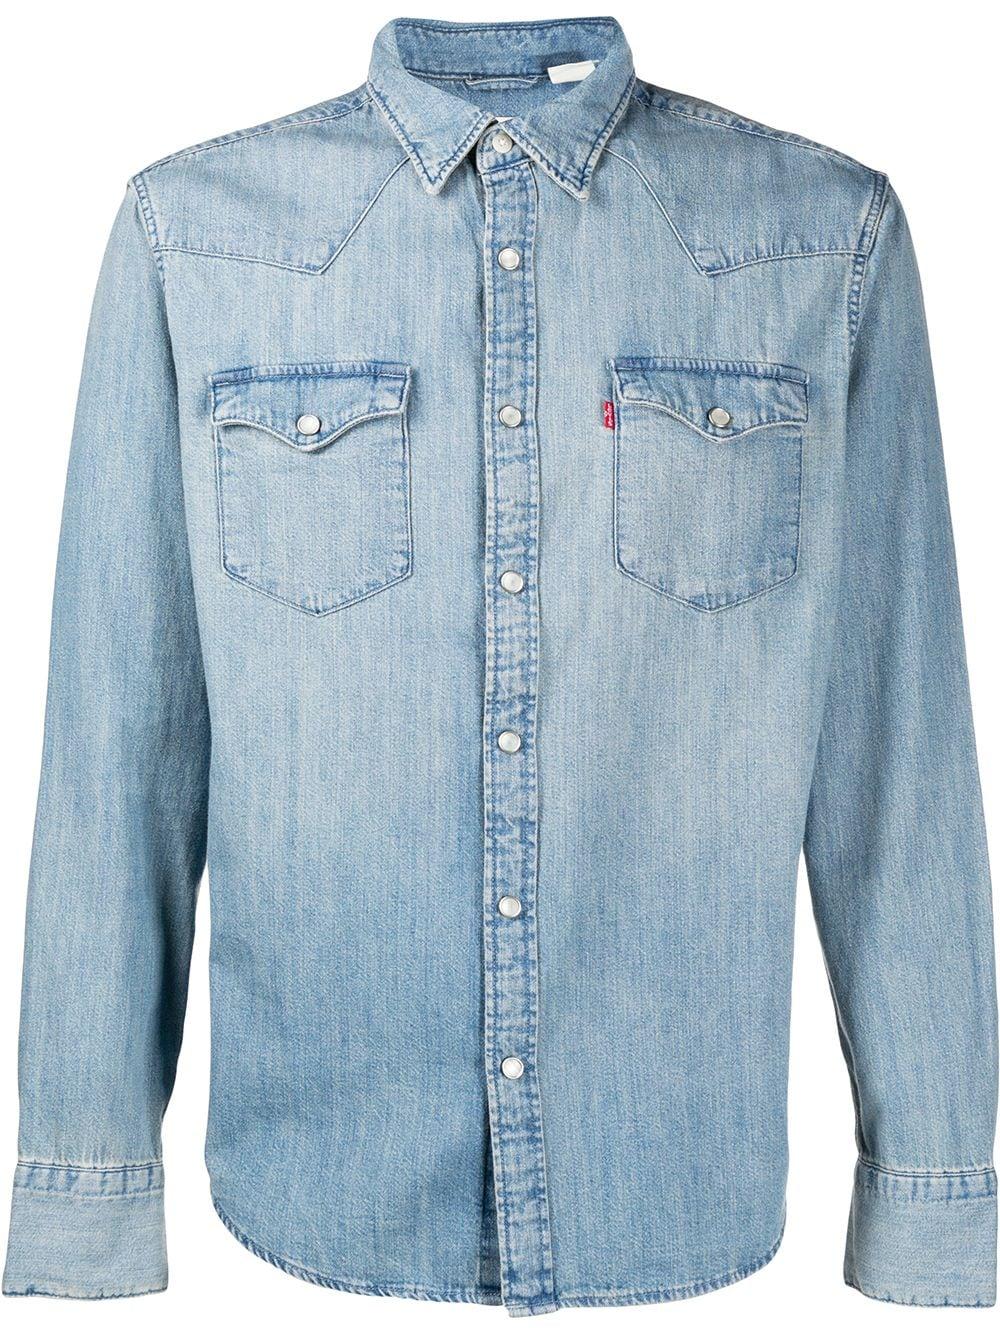 Levi's Classic Barstow Western Shirt Blue 574290001